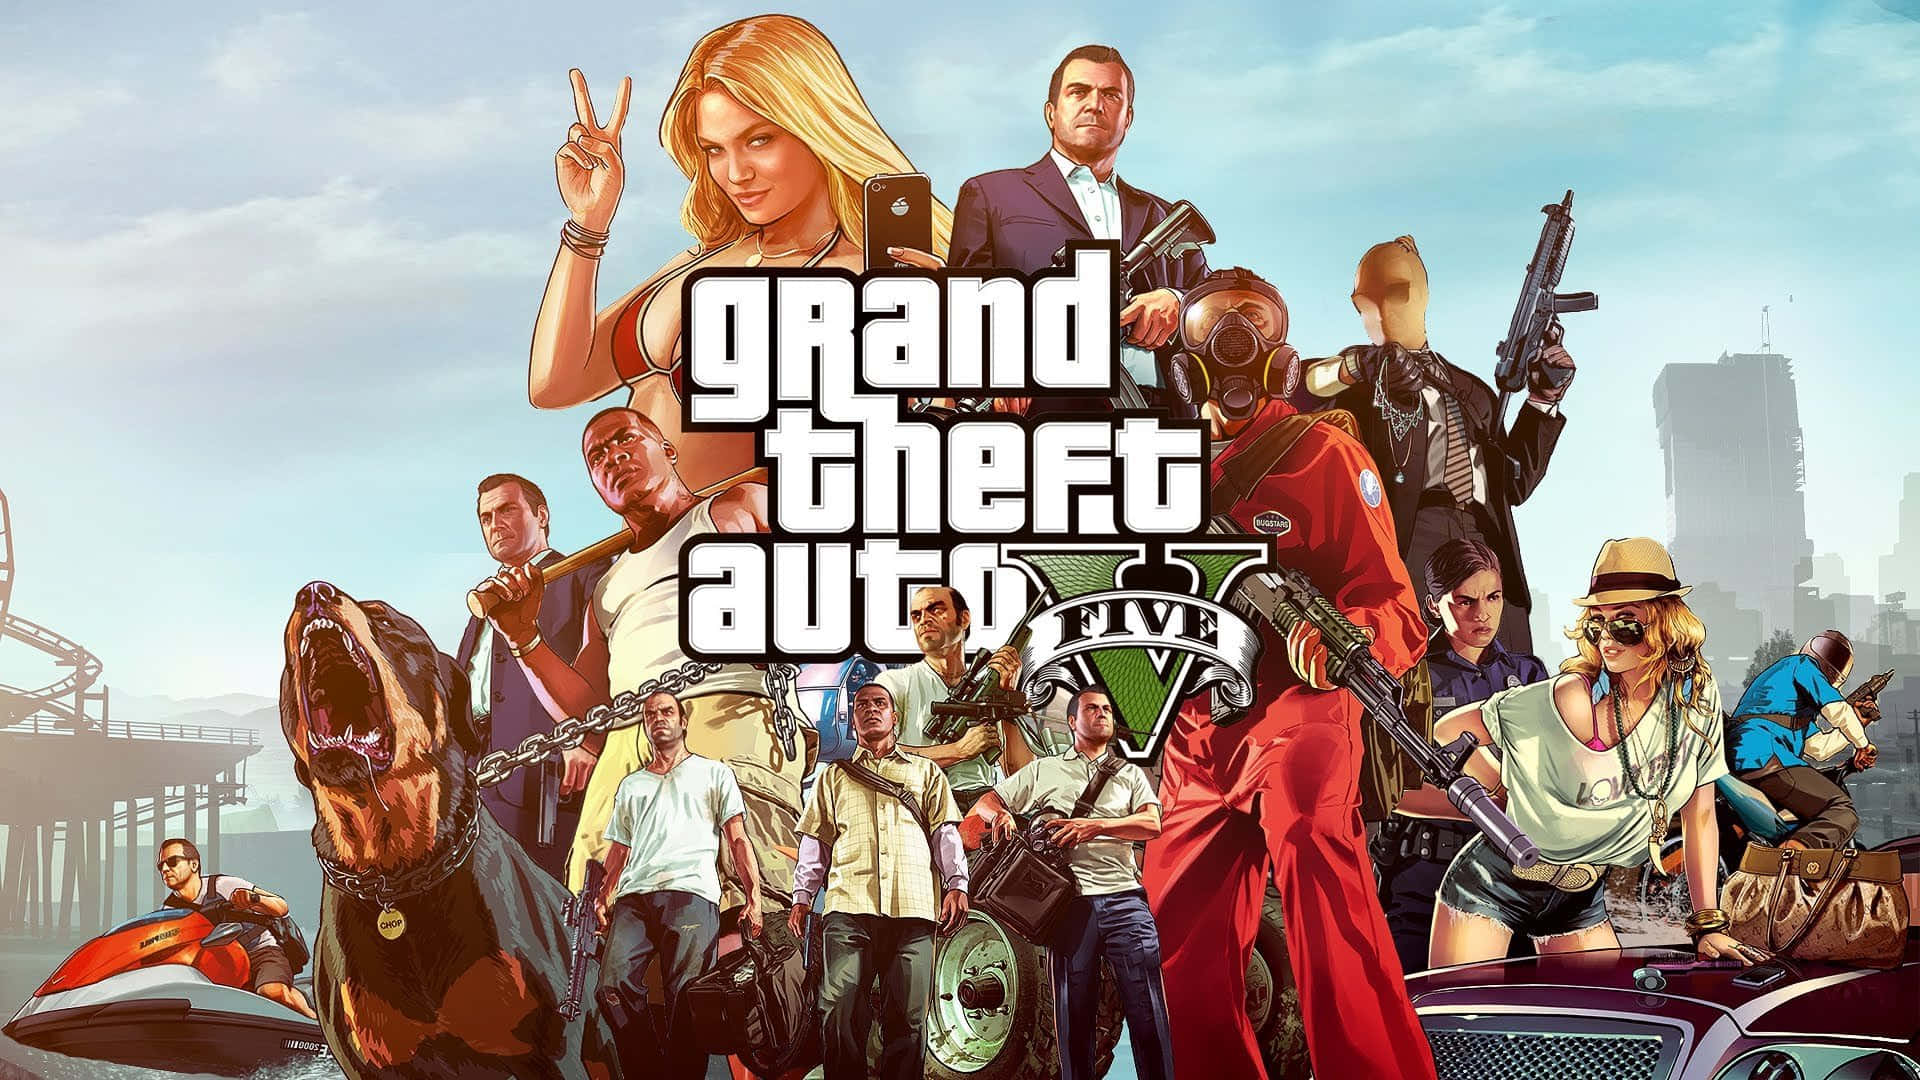 "Grand Theft Auto 5: The Thrill is On!"